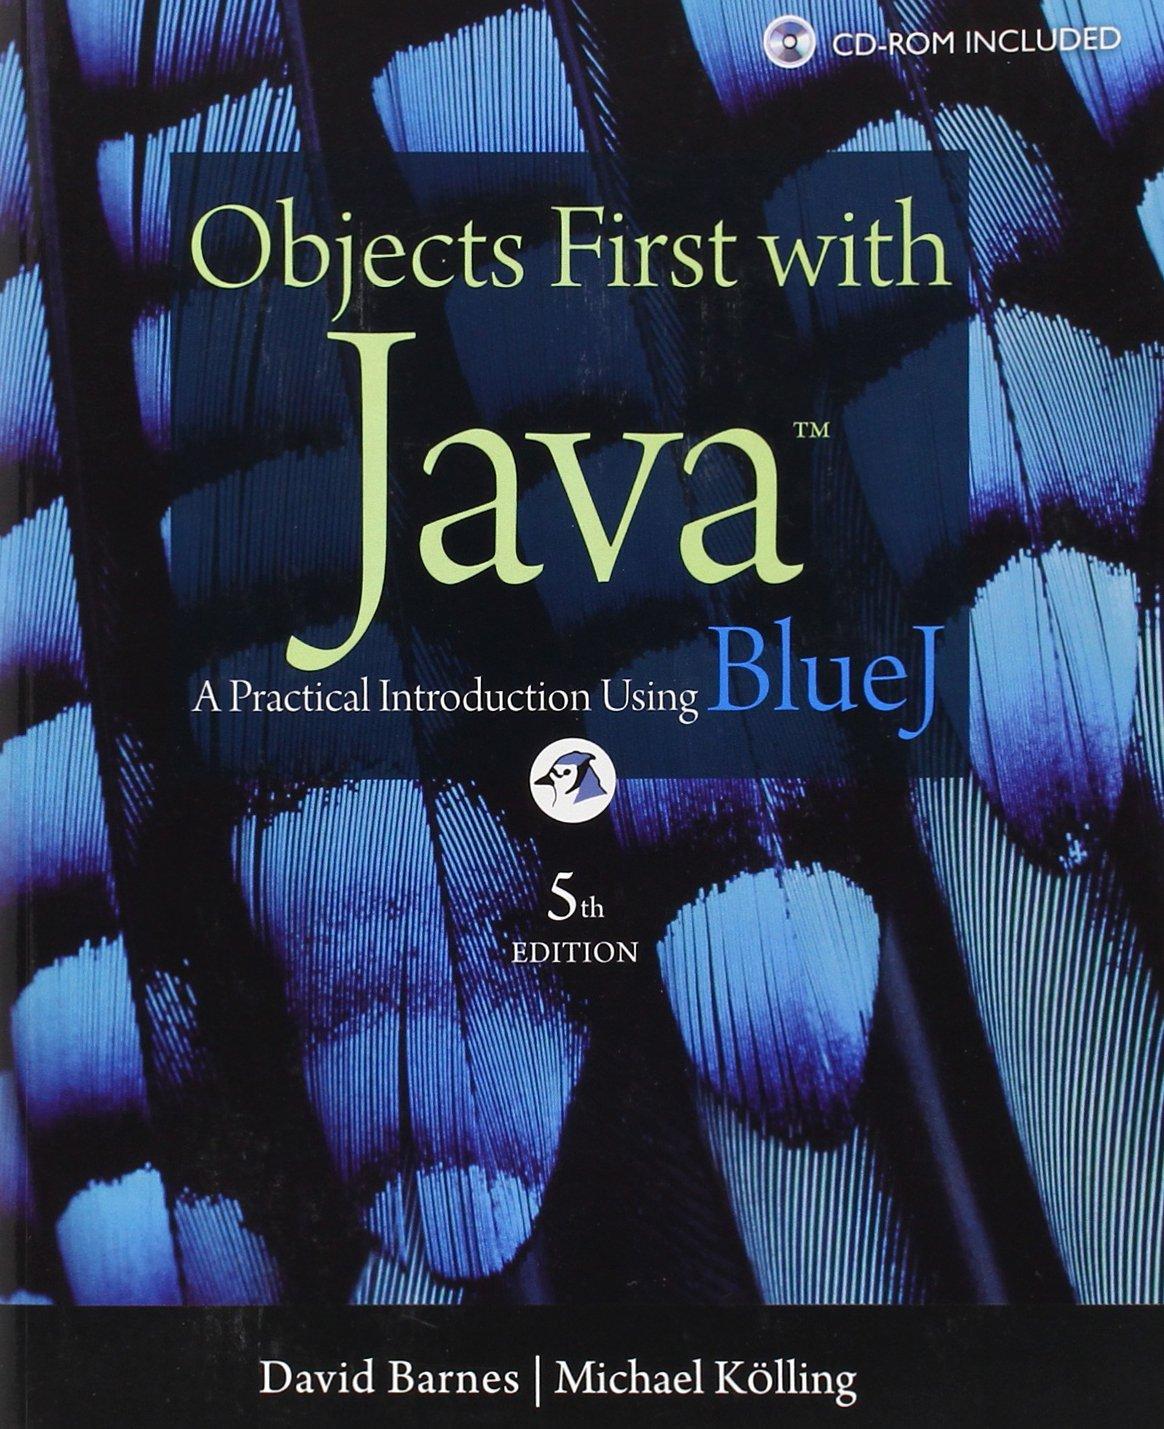 objects first with java a practical introduction using bluej 5th edition david j. barnes, michael kolling